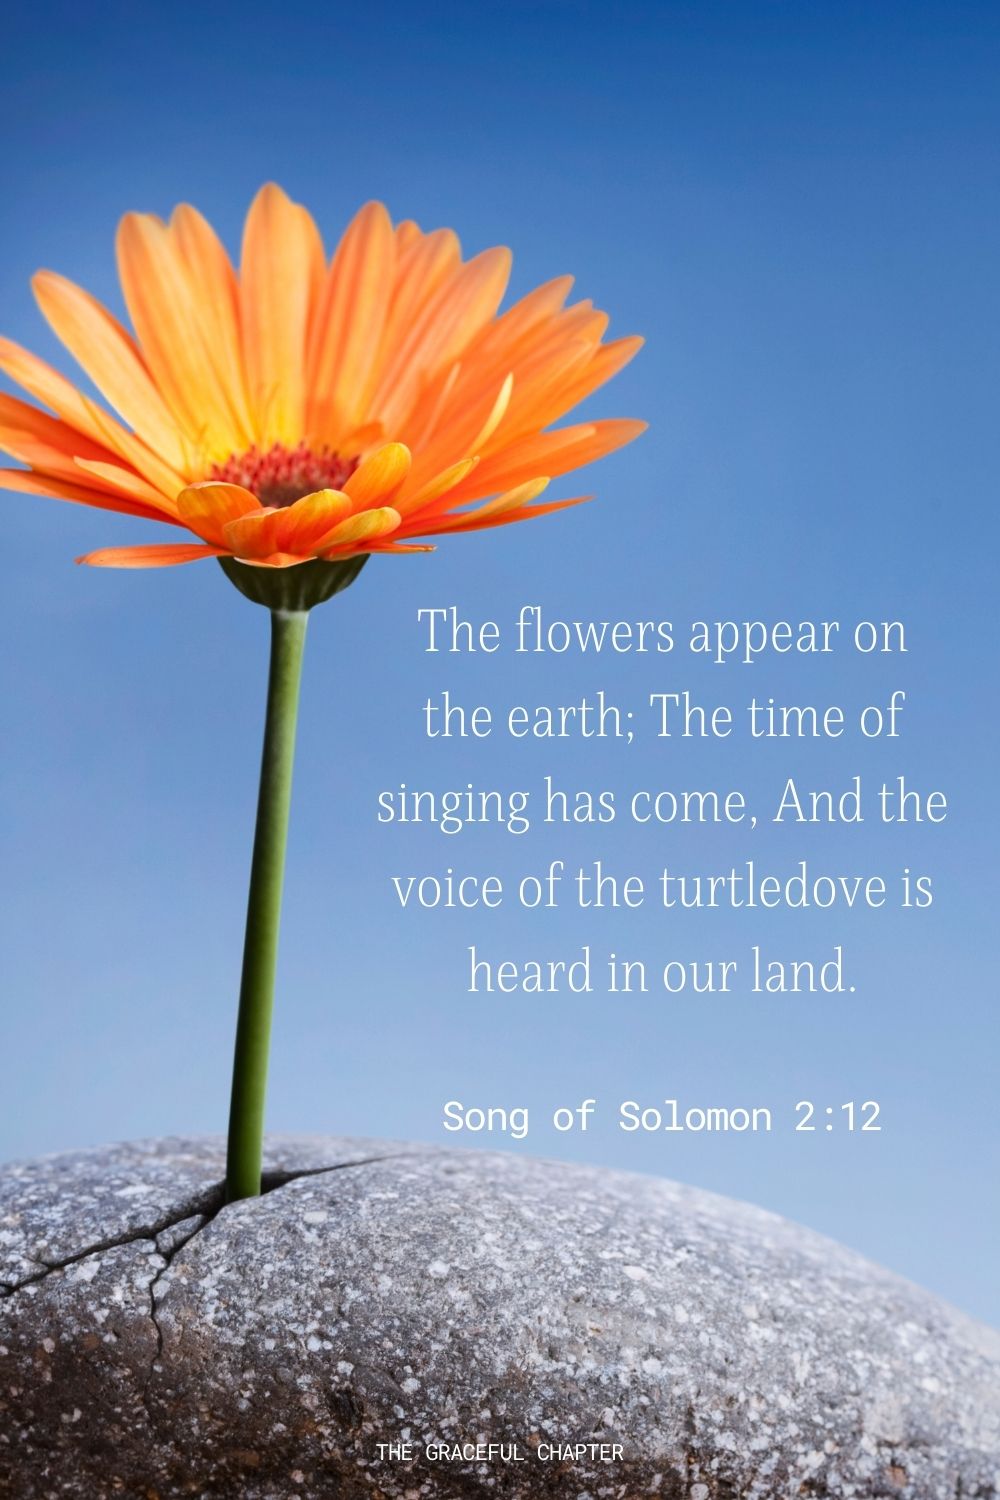 The flowers appear on the earth; The time of singing has come, And the voice of the turtledove is heard in our land. Song of Solomon 2:12